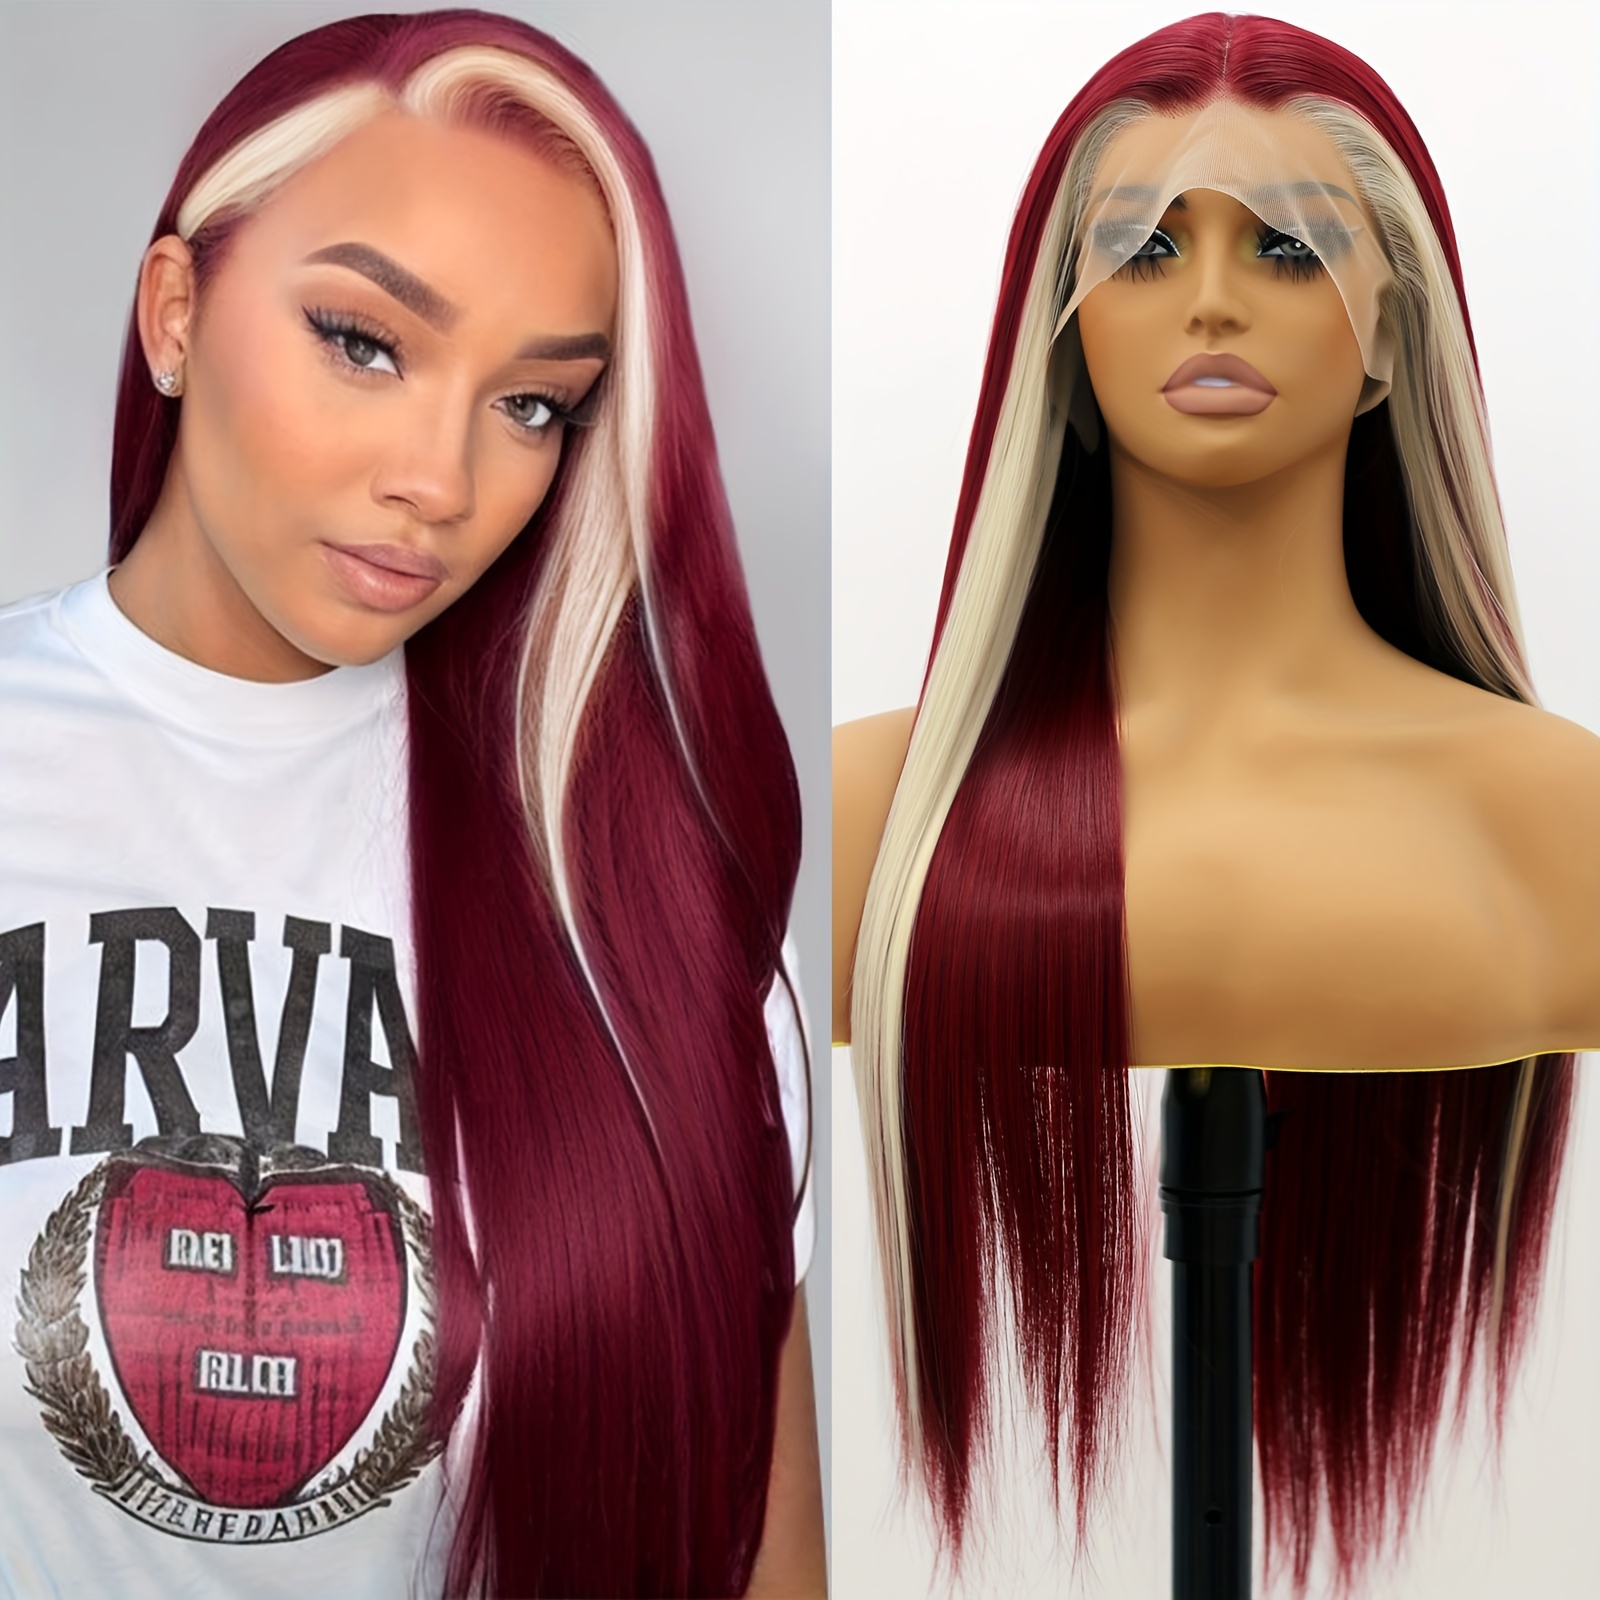 

Long Wavy Red With Blonde Wig Burgundy Mixed Blonde Skunk Stripe Wigs Lace Front Wig Synthetic Heat Resistant Fiber Wig For Women Daily Party Cosplay Use (24 Inch)